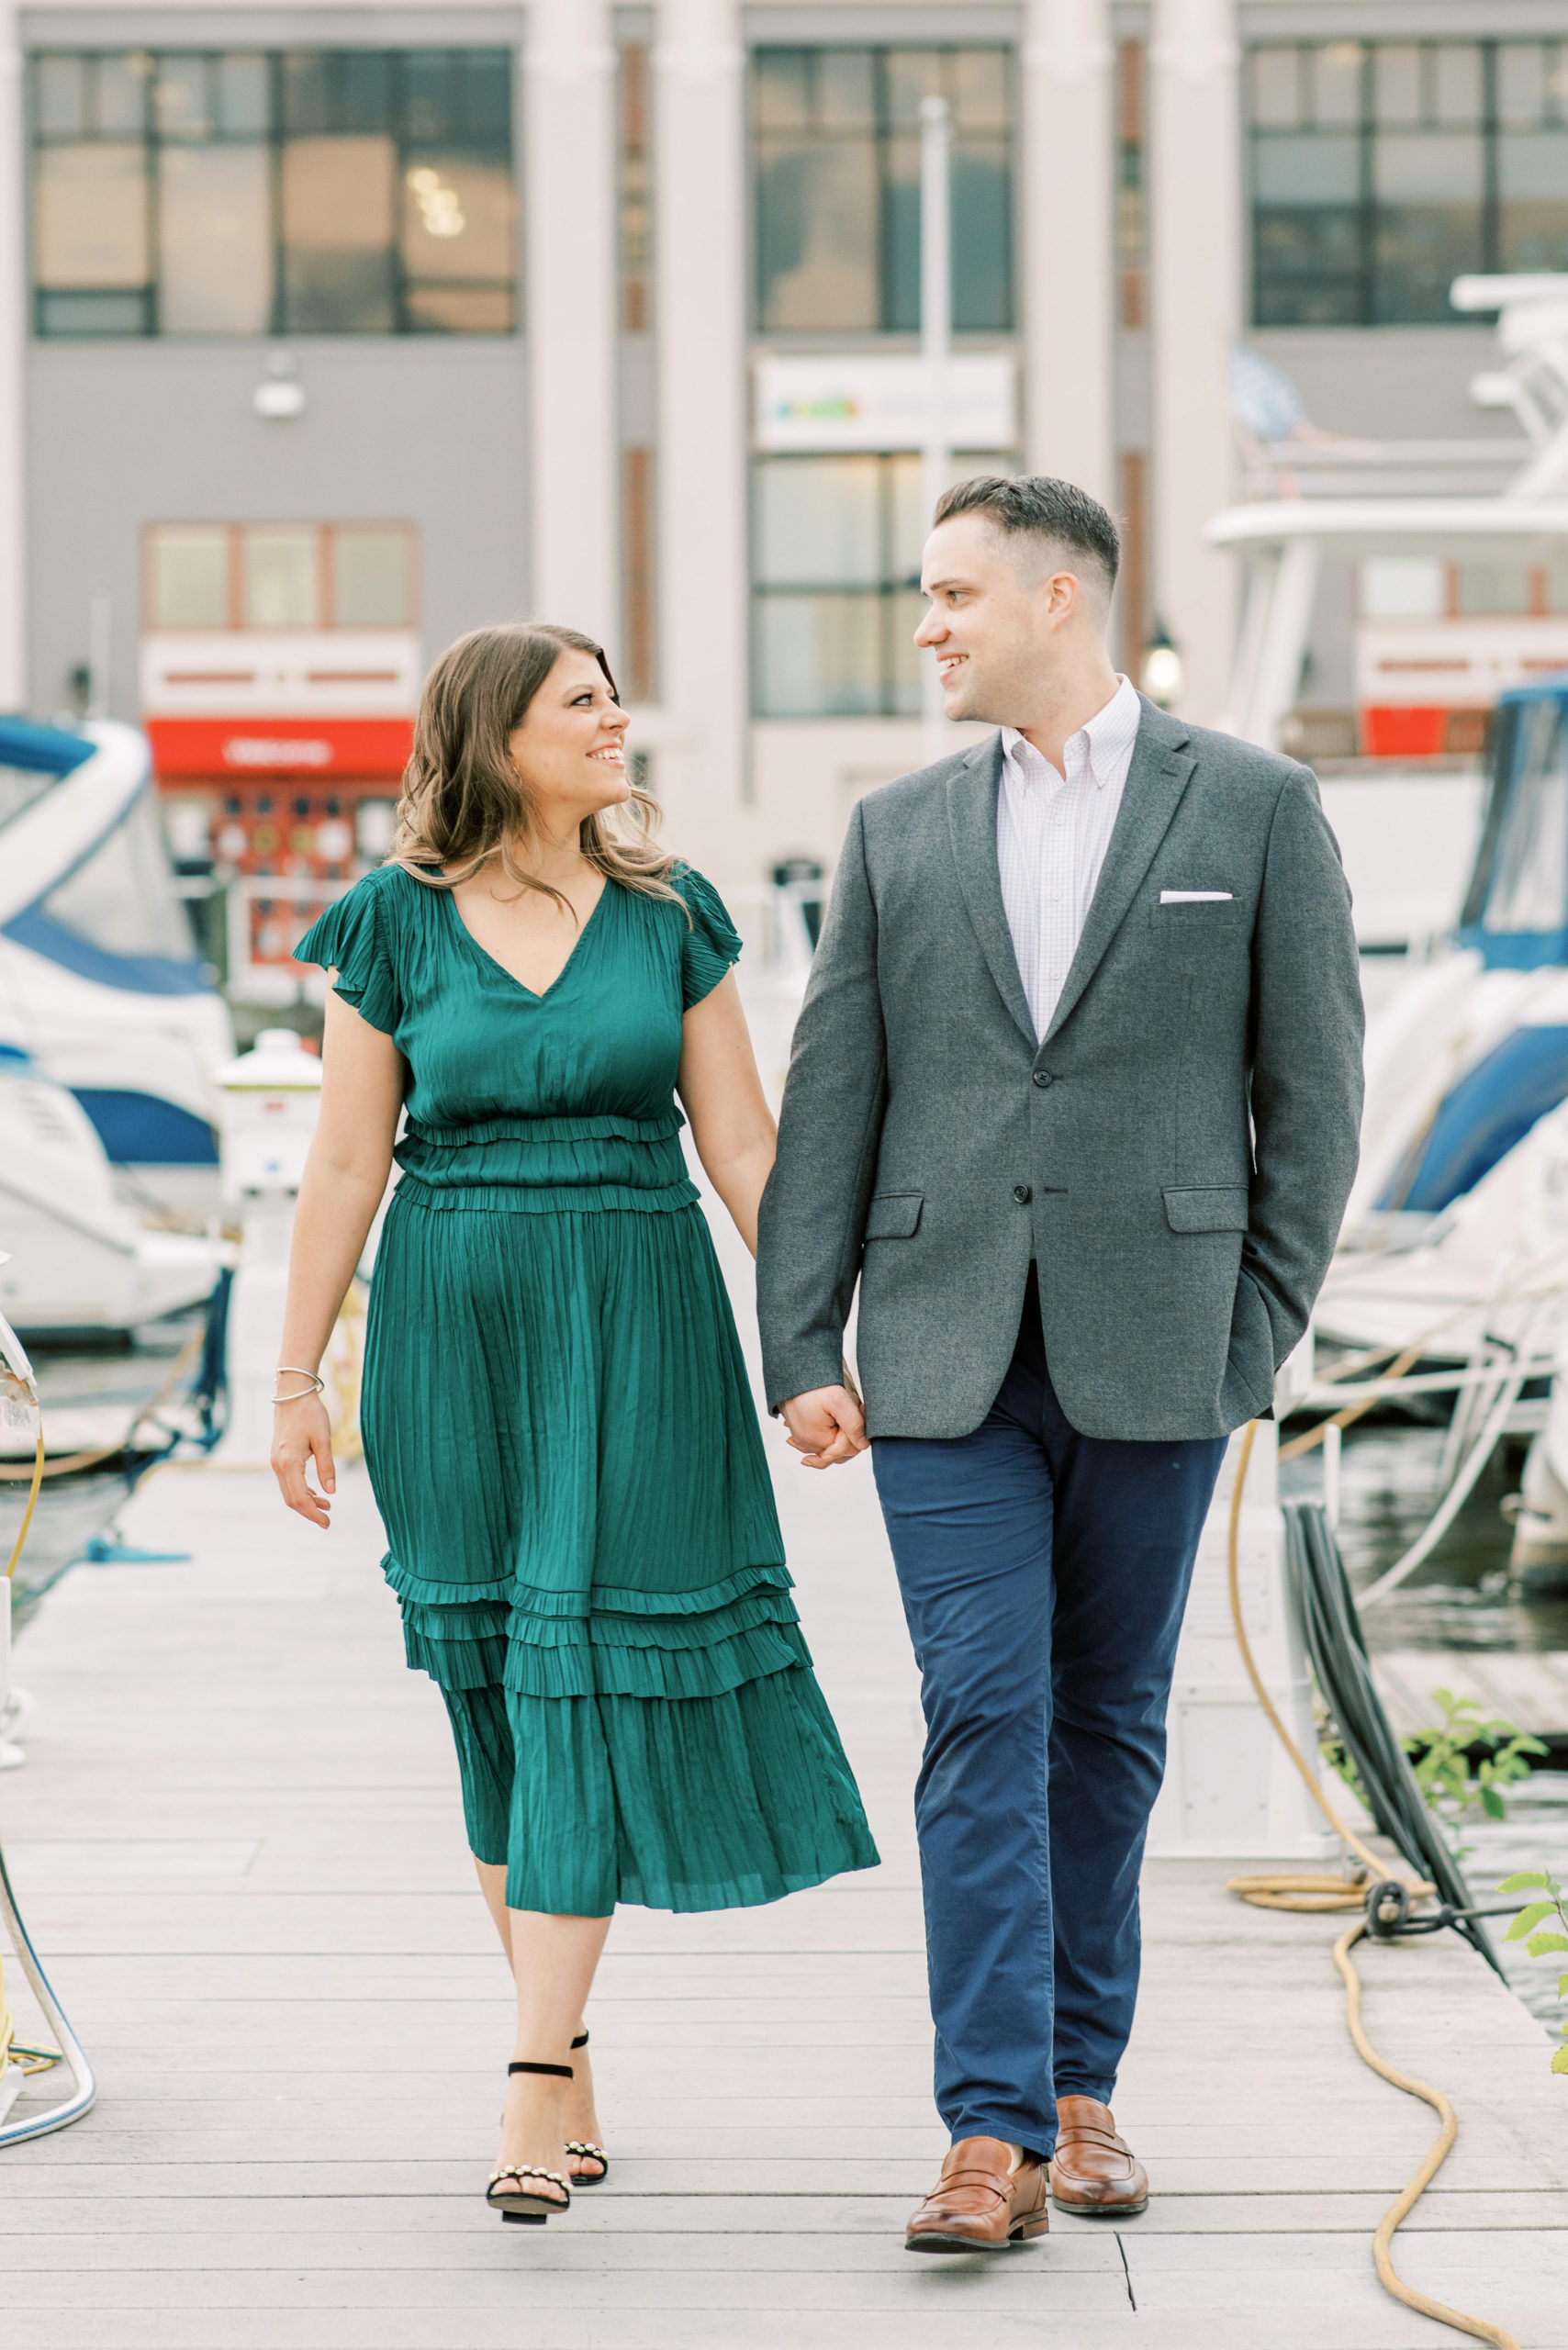 A fine-art anniversary session at sunrise throughout Old Town Alexandria, including the waterfront, cobblestone streets, and the Carlyle House.